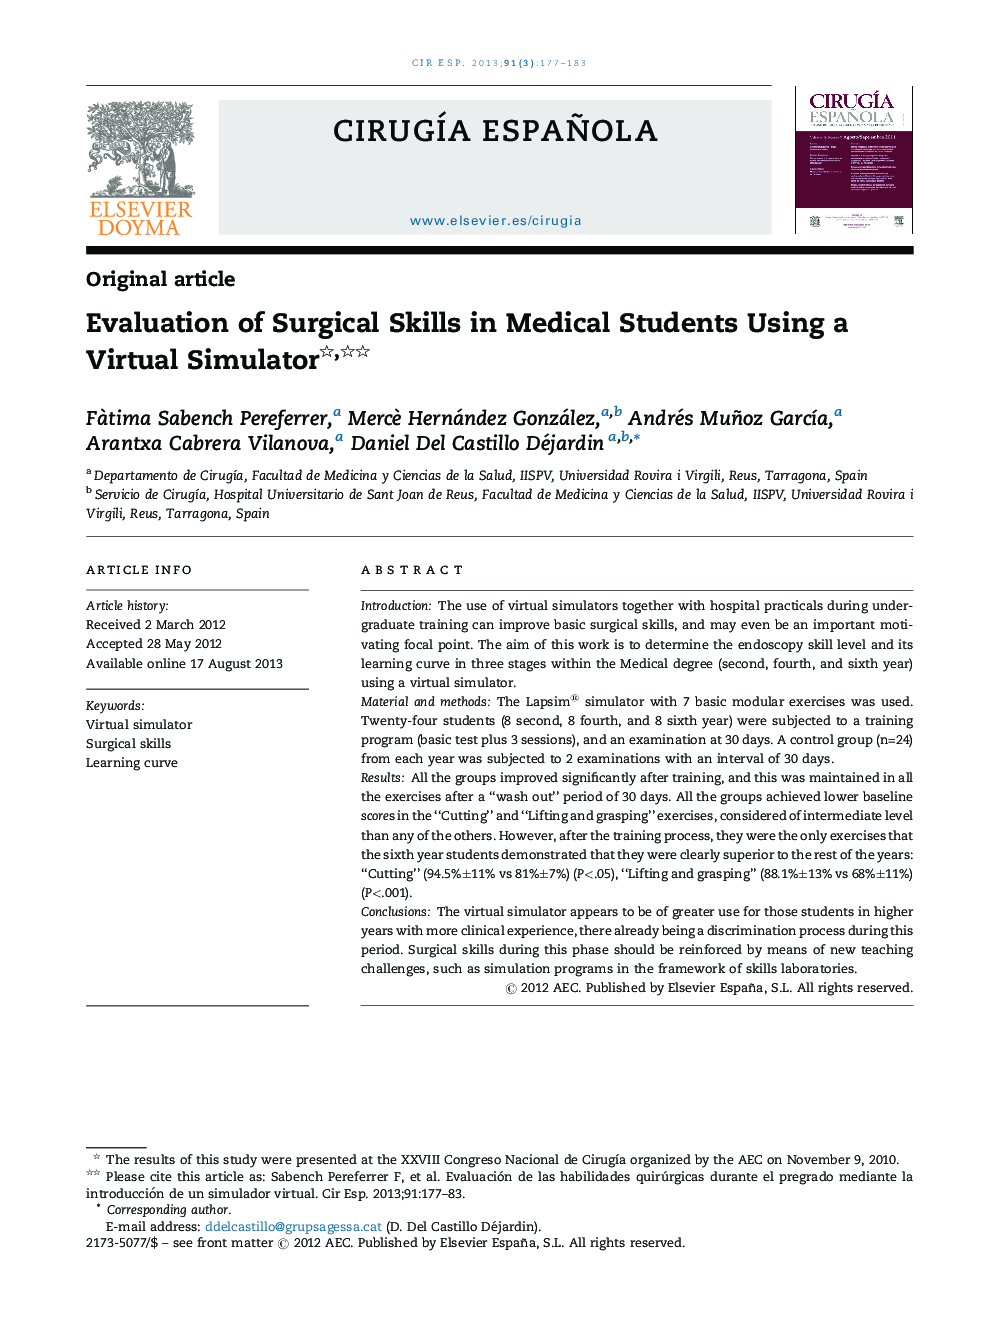 Evaluation of Surgical Skills in Medical Students Using a Virtual Simulator 